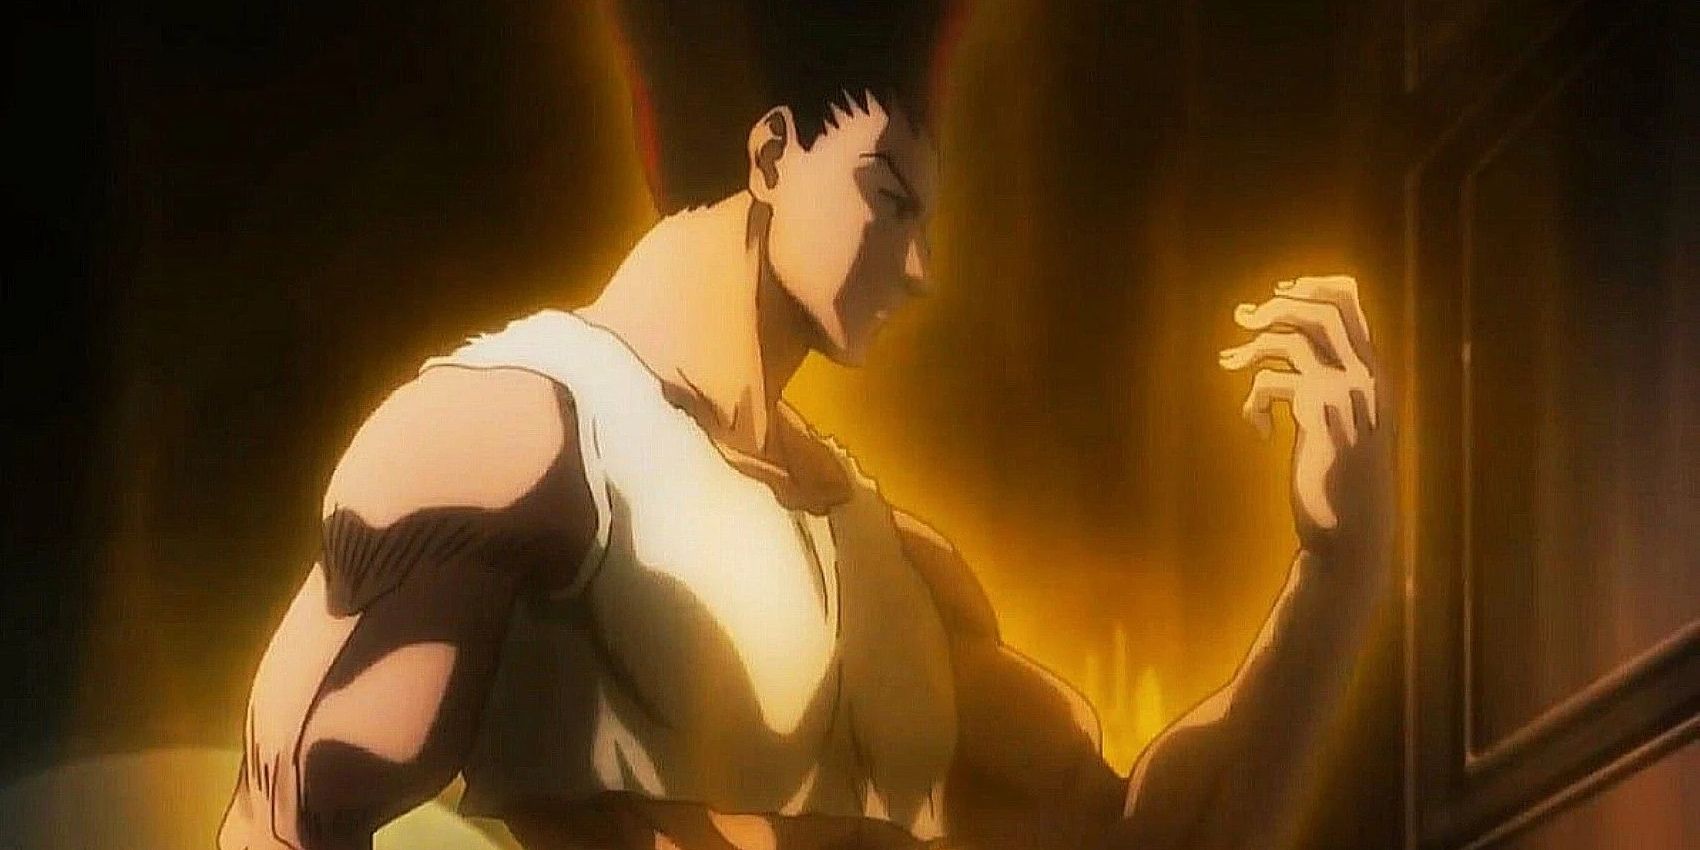 In Hunter X Hunter, if Netero was at his prime when he fought